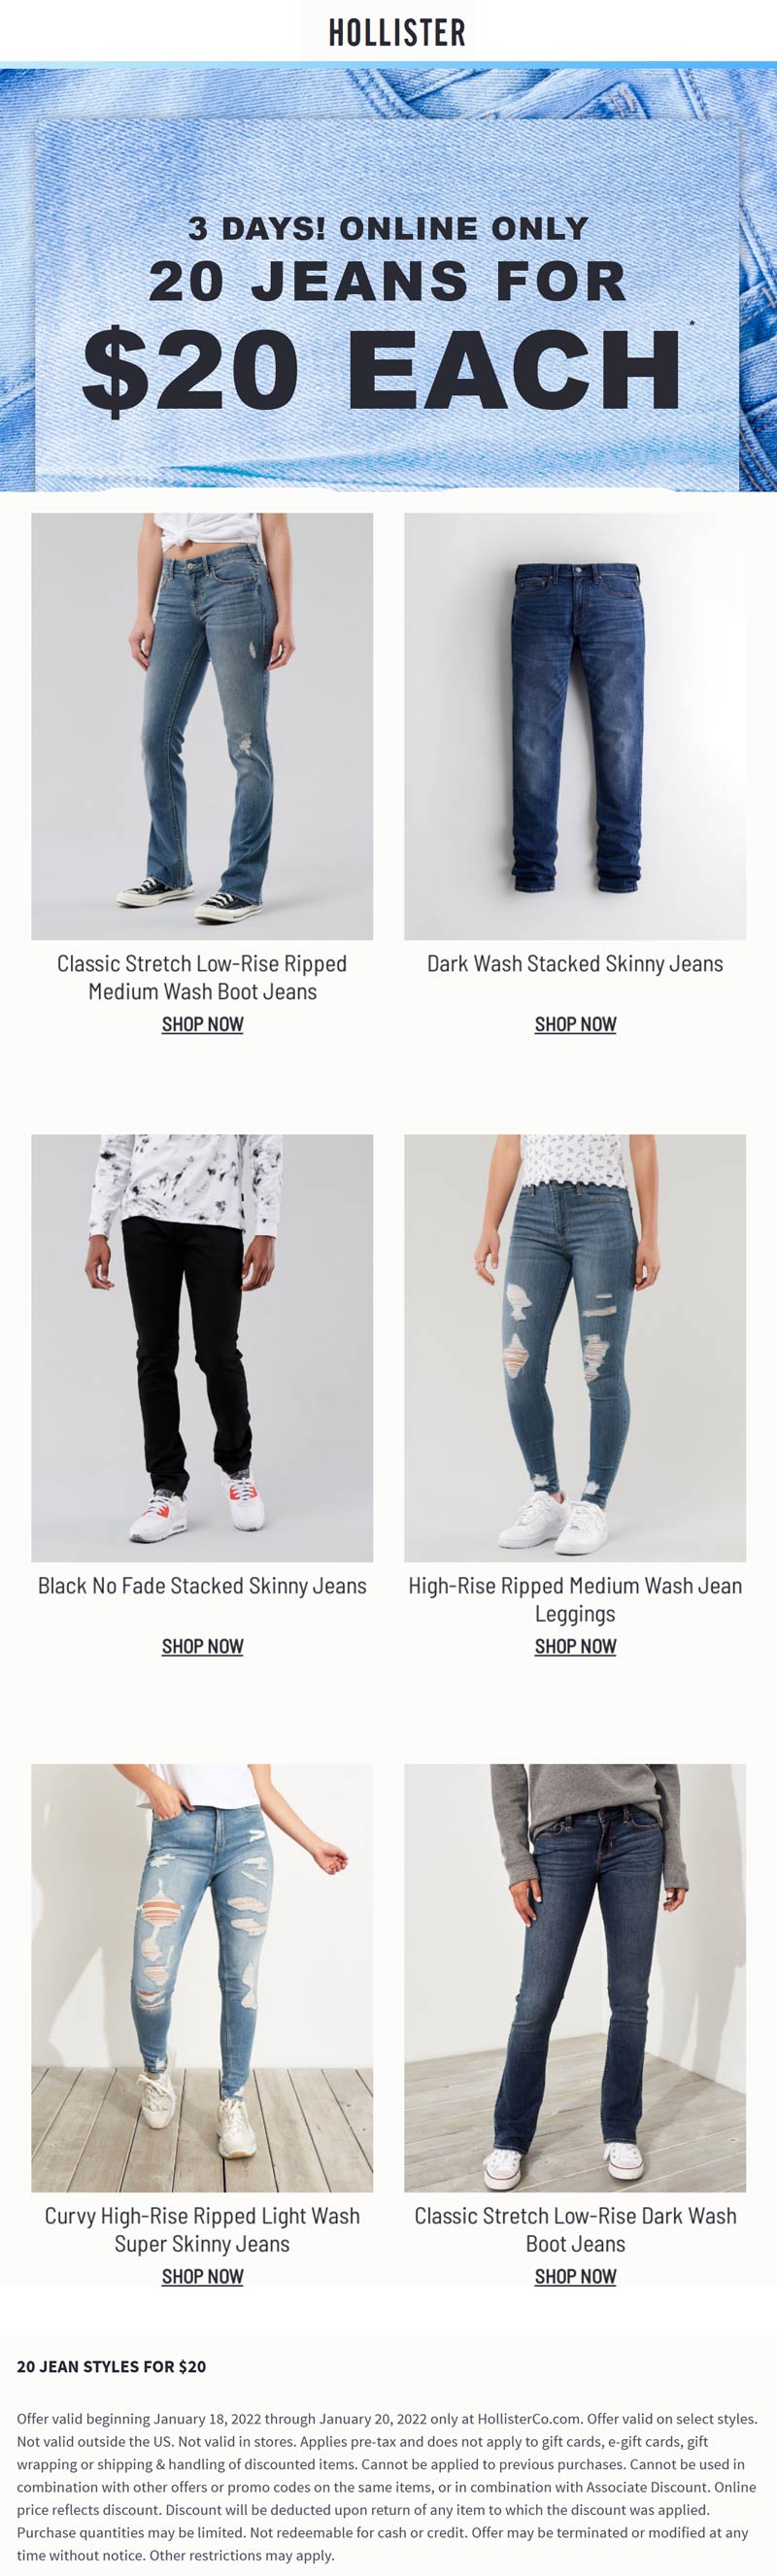 Hollister stores Coupon  20 jean styles for $20 online at Hollister #hollister 